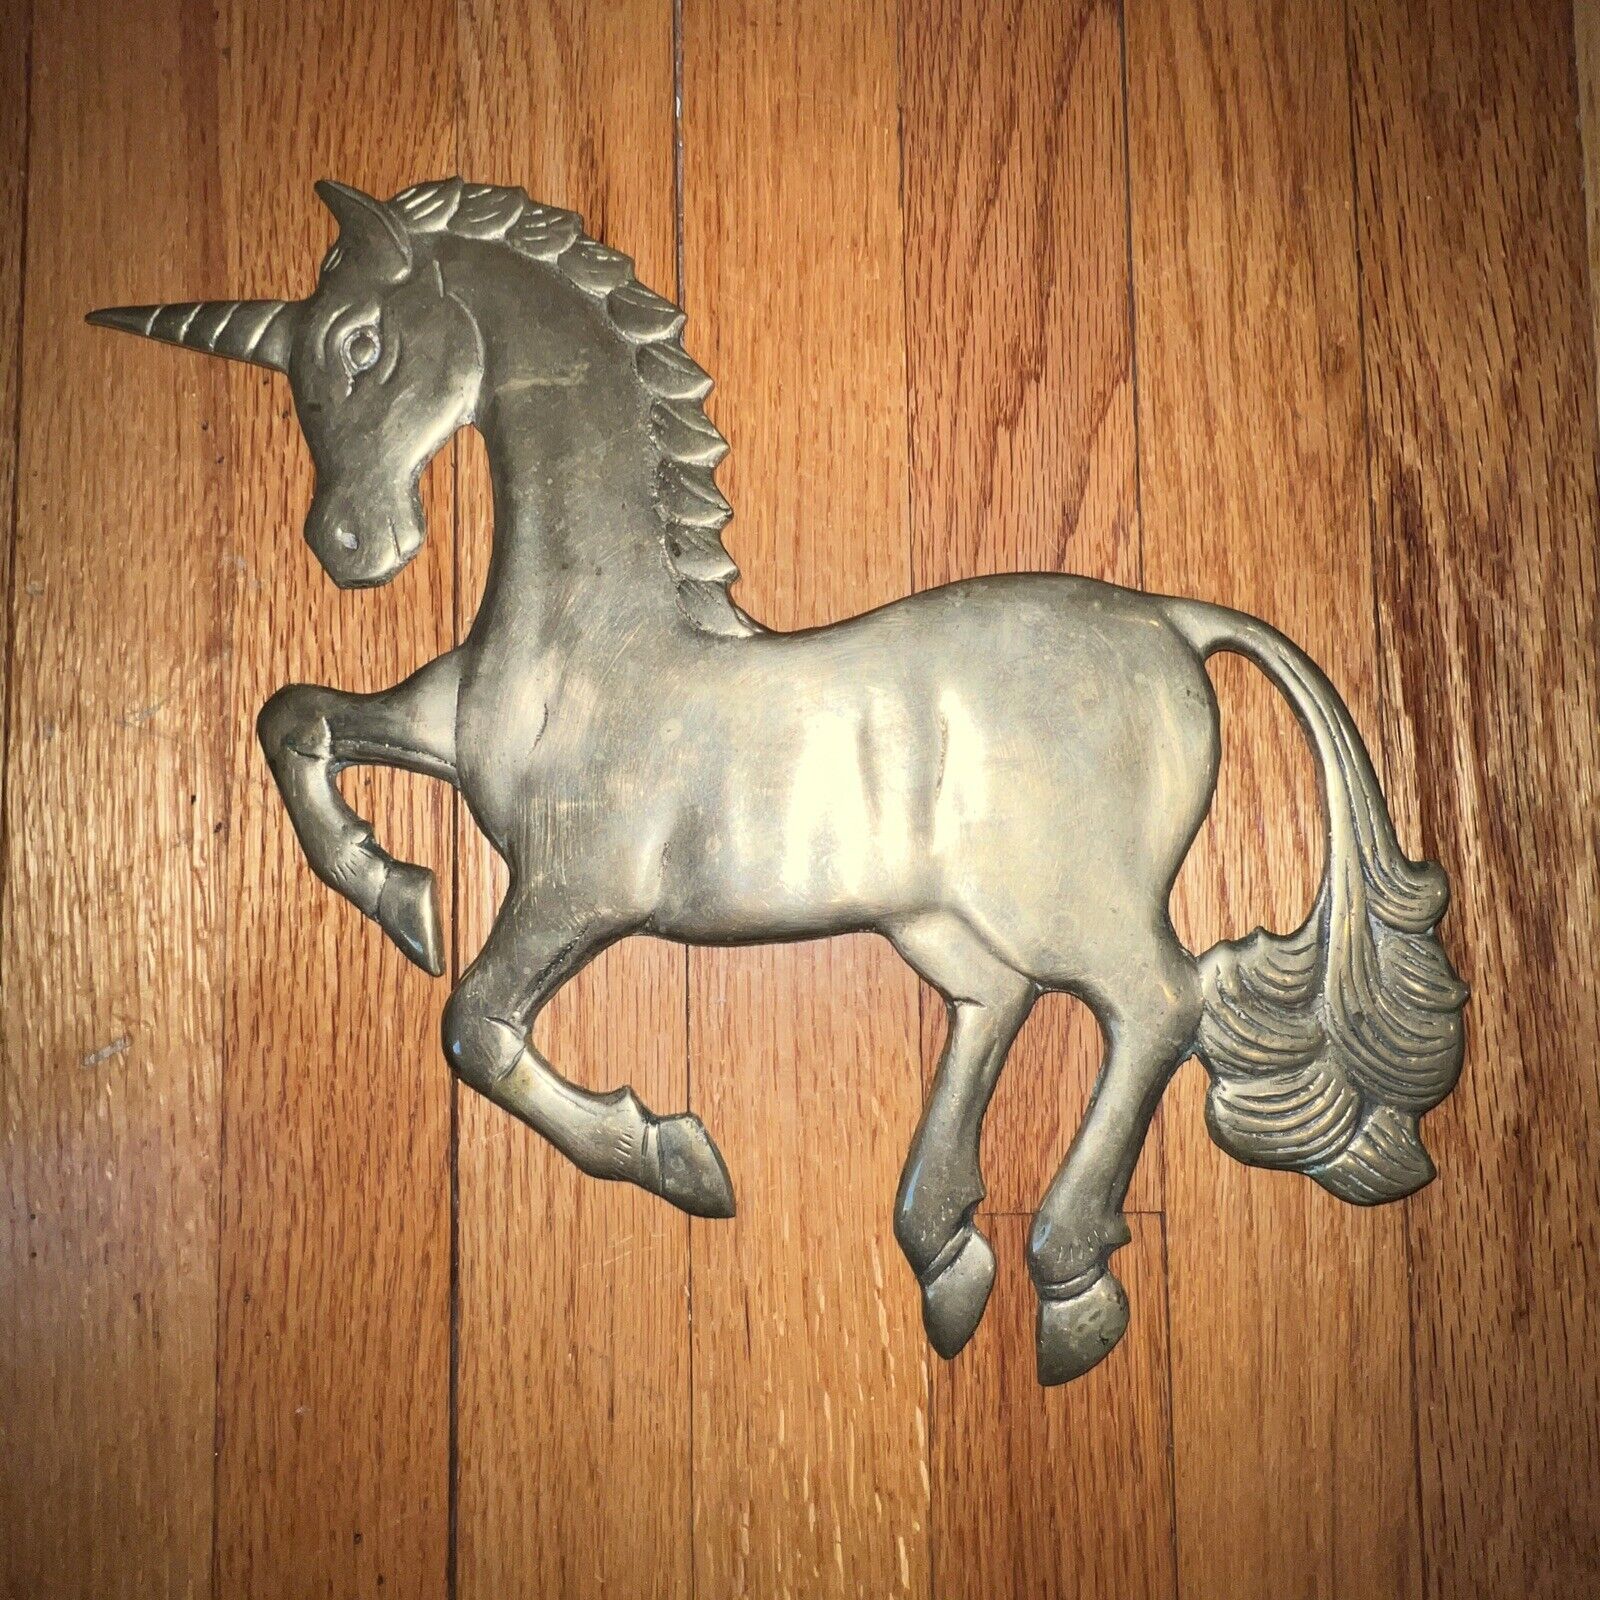 Vintage Magical Kitschy Brass Unicorn Wall Hanging Home Decor 14”x10 1/2”